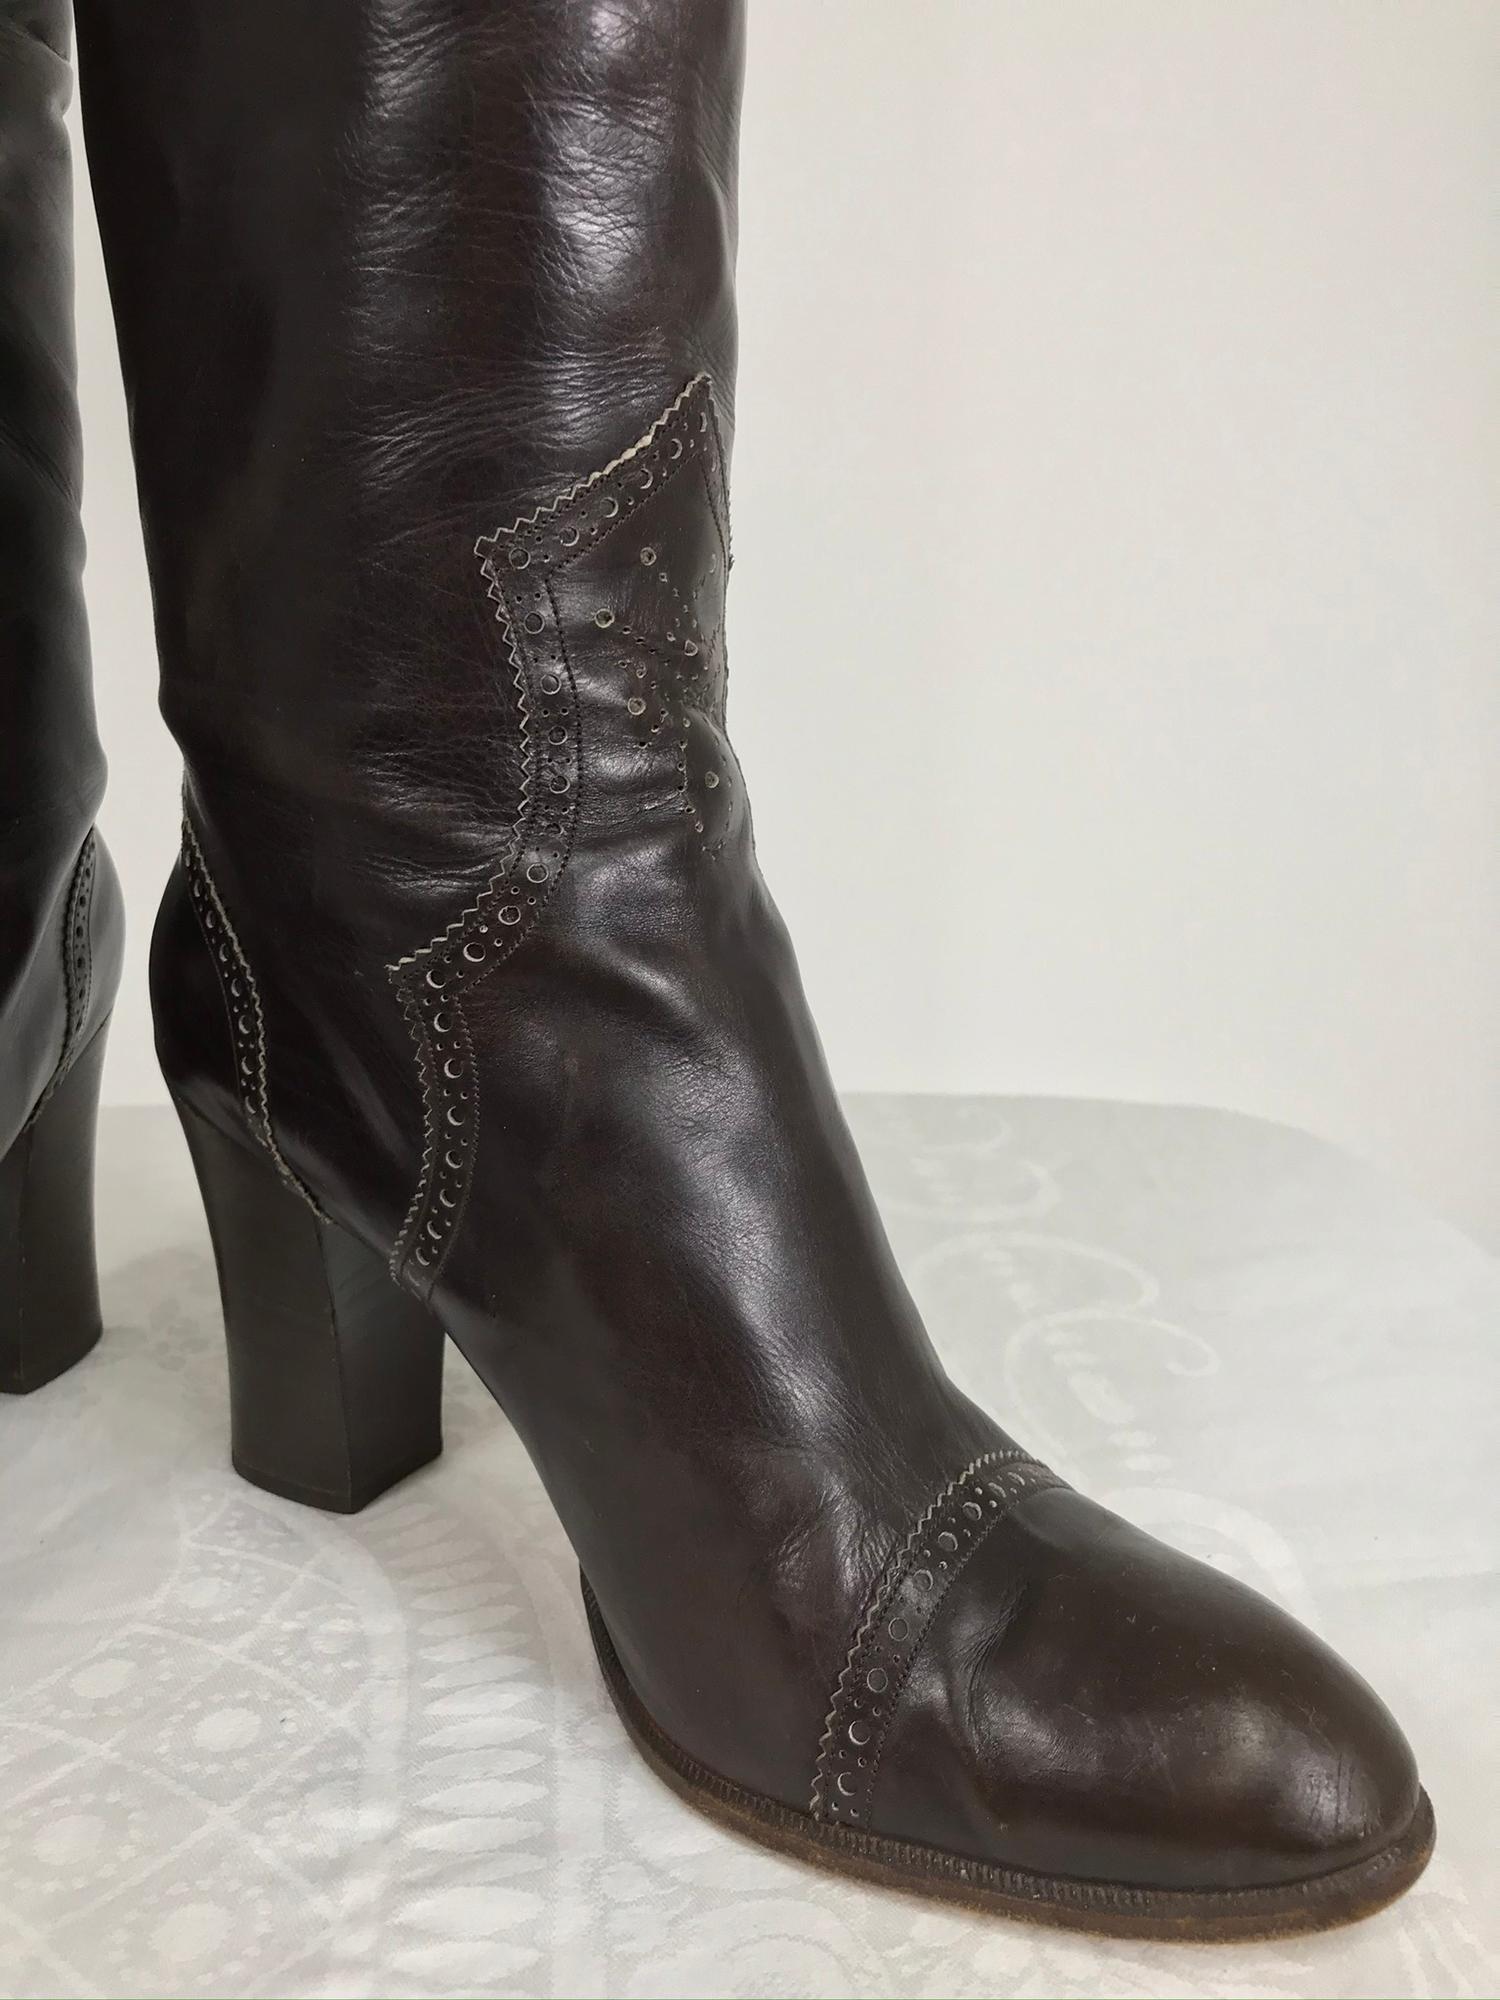 Yves Saint Laurent dark brown leather high heel boots, vintage from the 1970s in very good pre-worn condition. Round toe boots have stacked leather heels. The decorative perforations at the top band, back seam, toe band and ankle fronts are accented